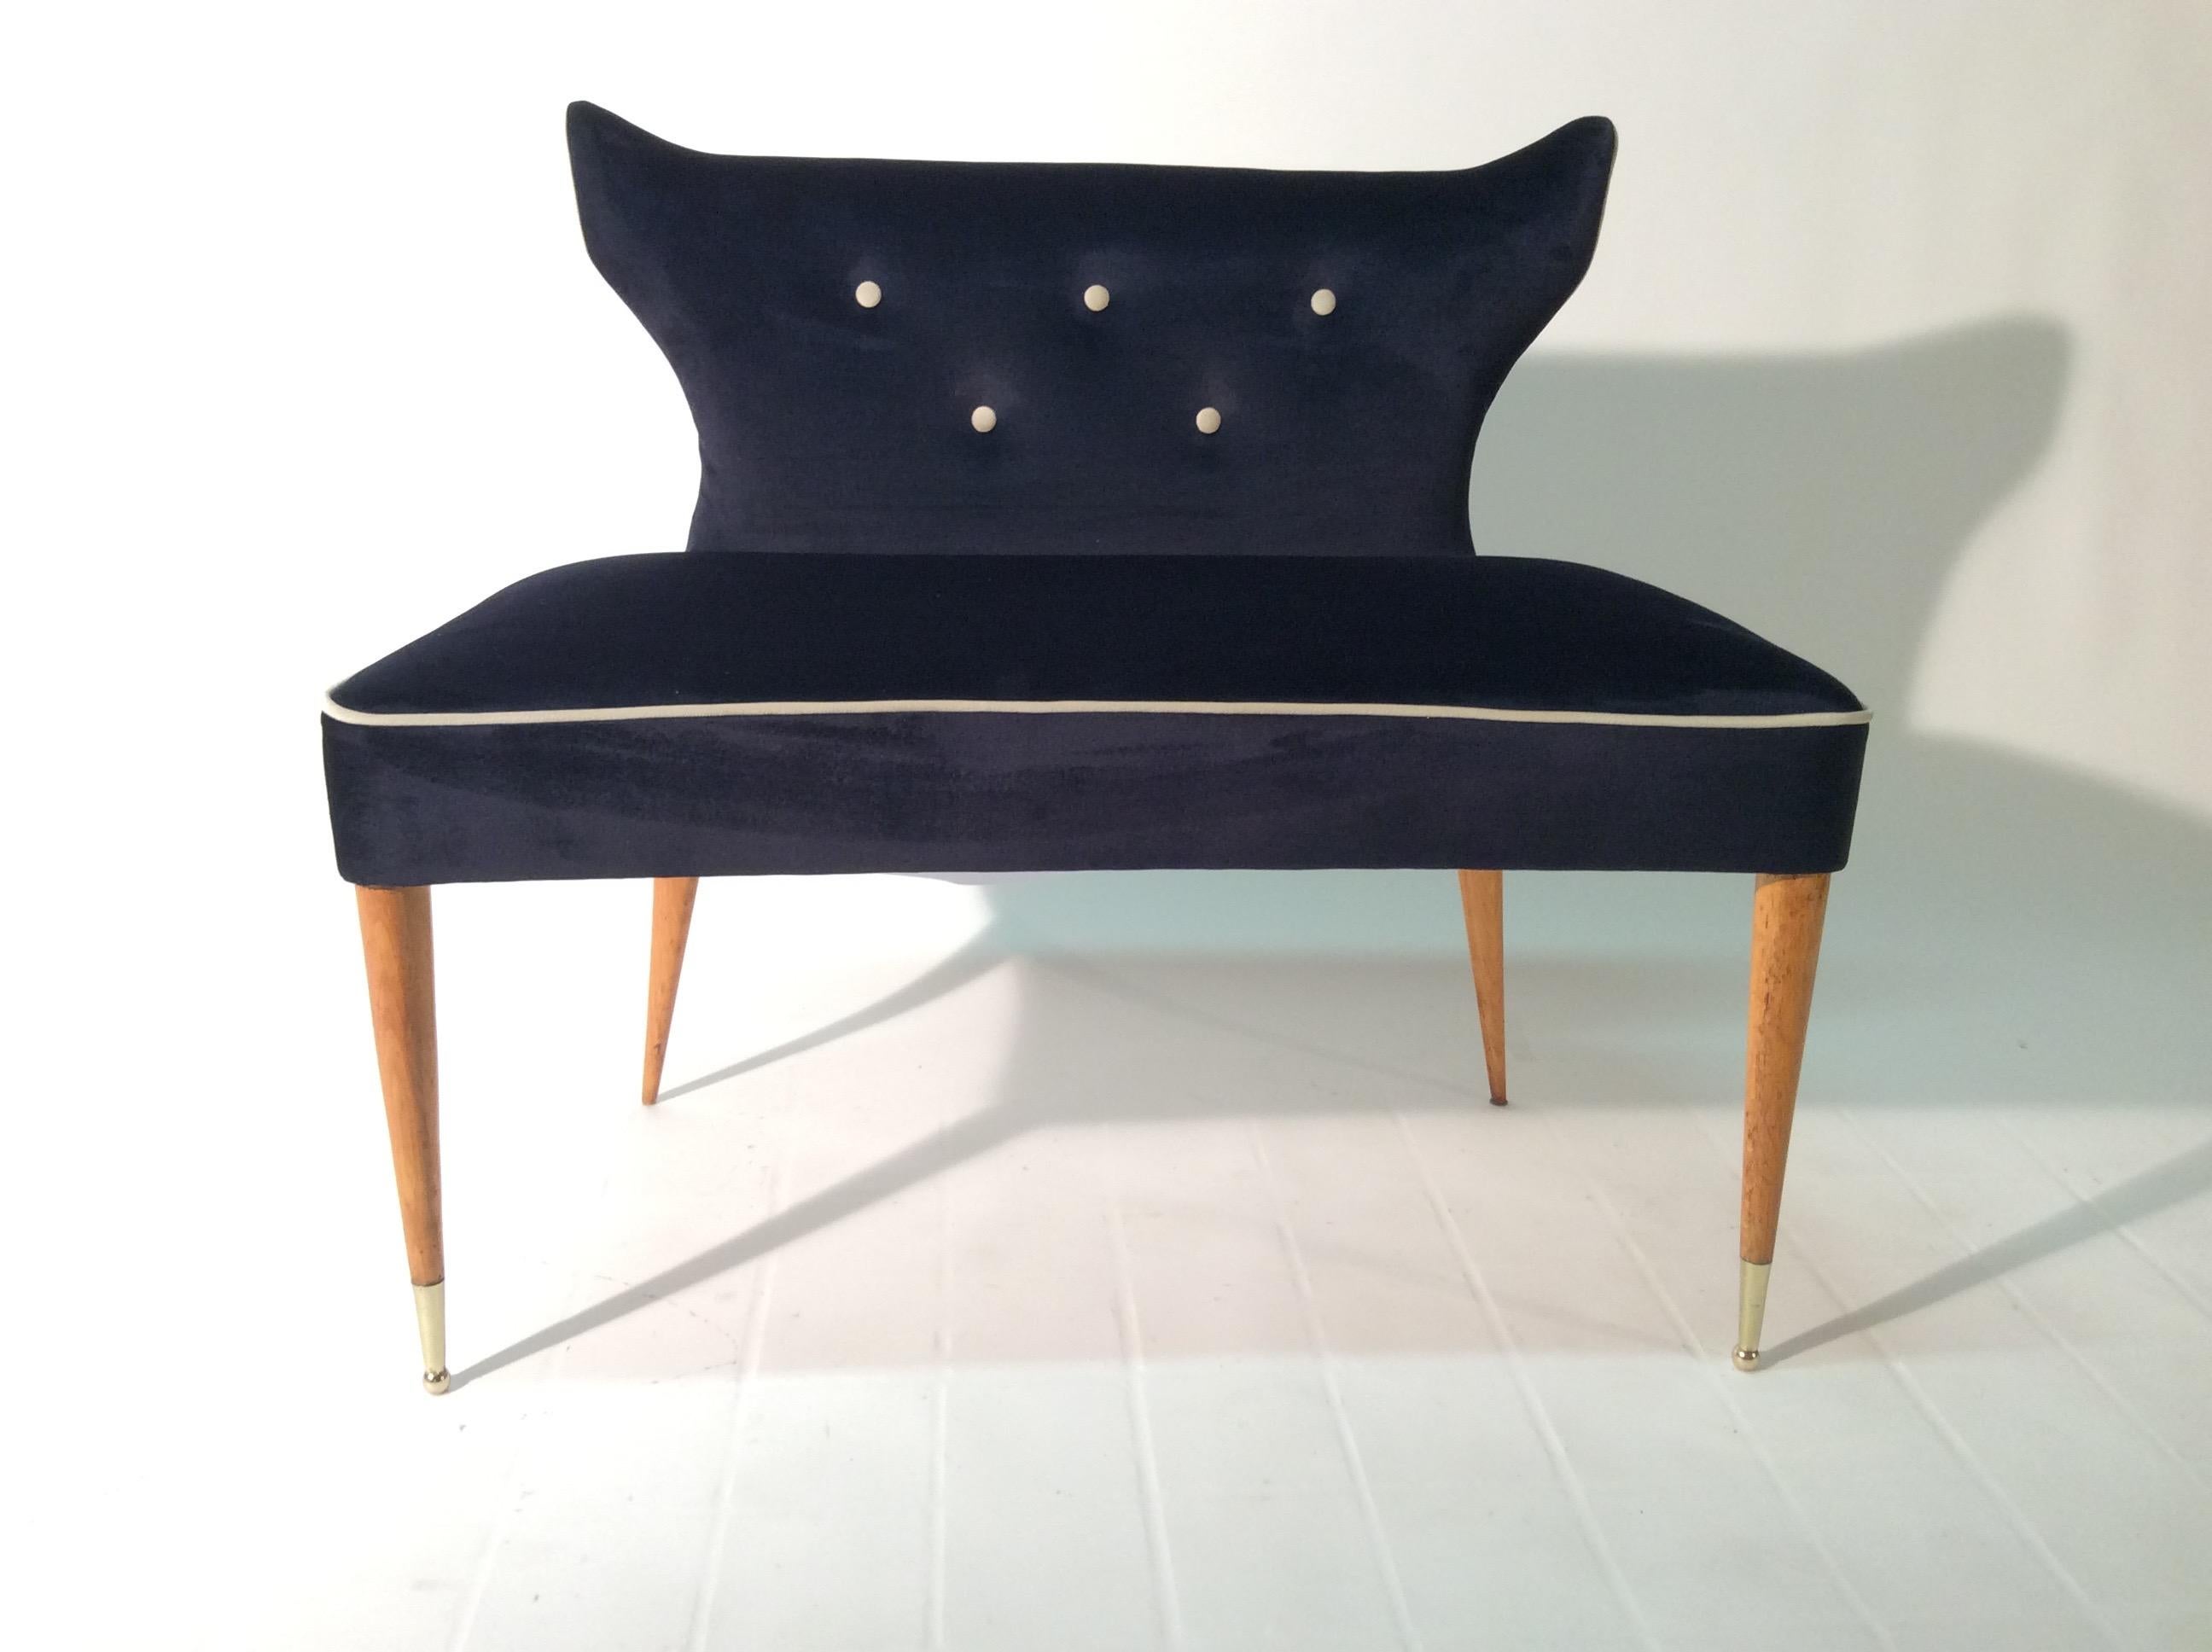 Small sofa or stool with backrest, Italian Settee 1950s with wooden legs and brass feet, newly covered with dark blue velvet.
Beautiful shaped and curved back, this small sofa or stool can be positioned at the bottom of a bed, in a guradroba,